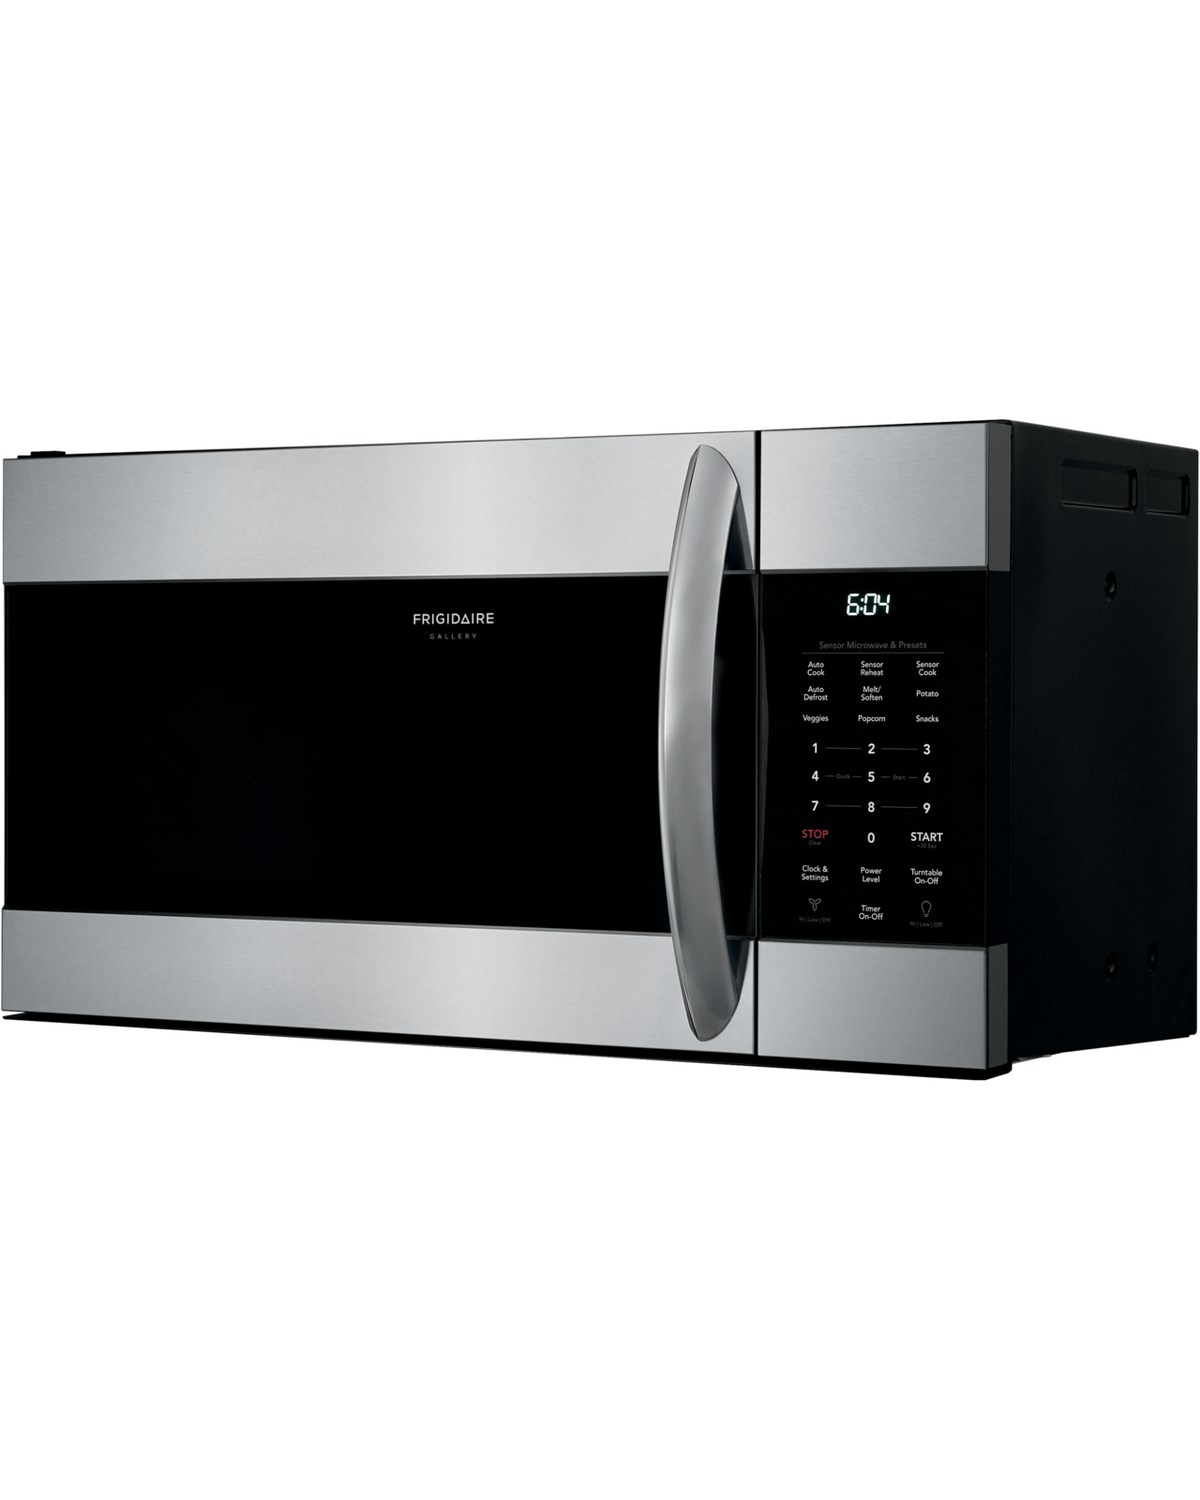 Frigidaire Gallery FGMV17WNVF 1.7 Cu. Ft. Over-The-Range Microwave